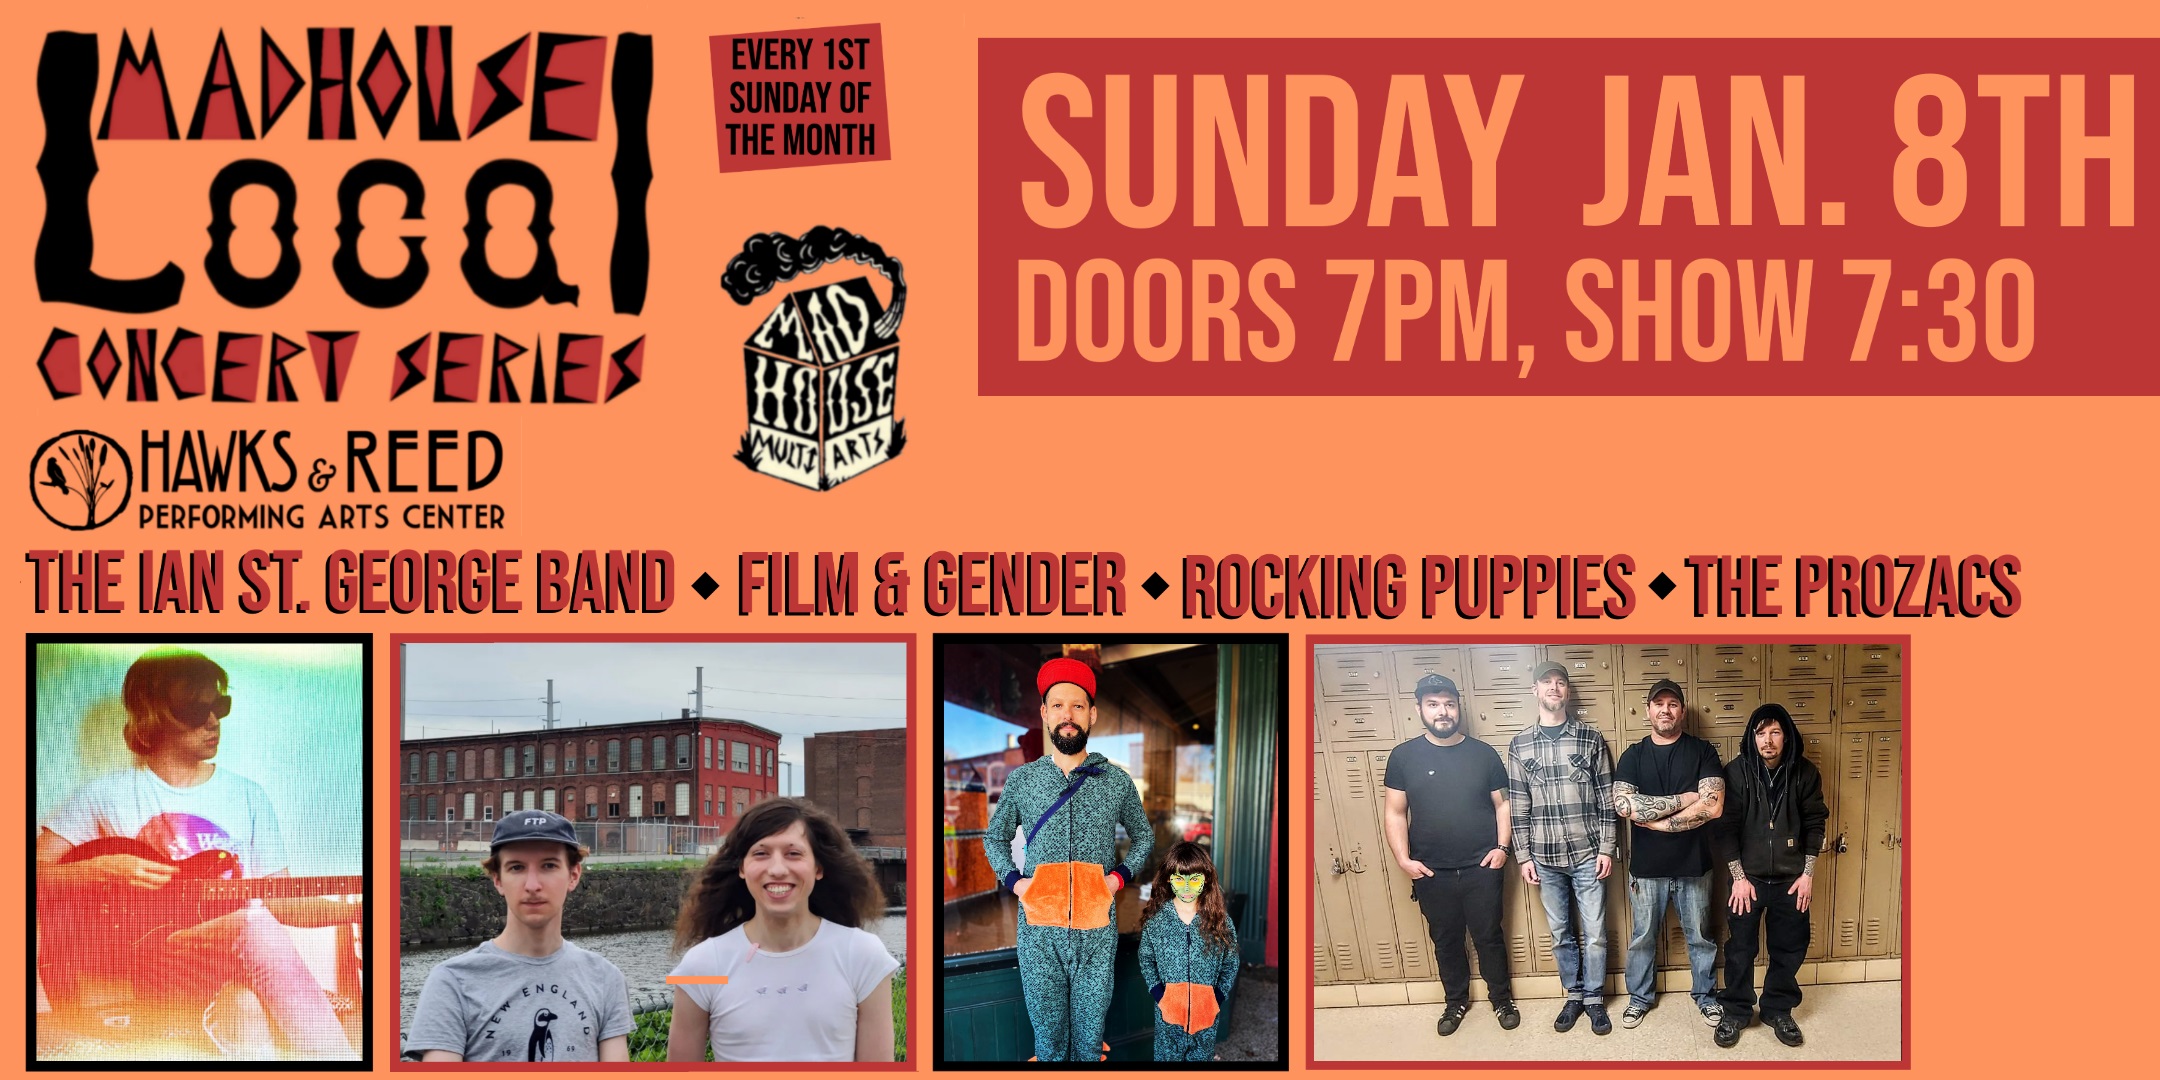 Madhouse Local Concert Series: The Ian St. George Band / Film & Gender / The Rocking Puppies / The Prozacs